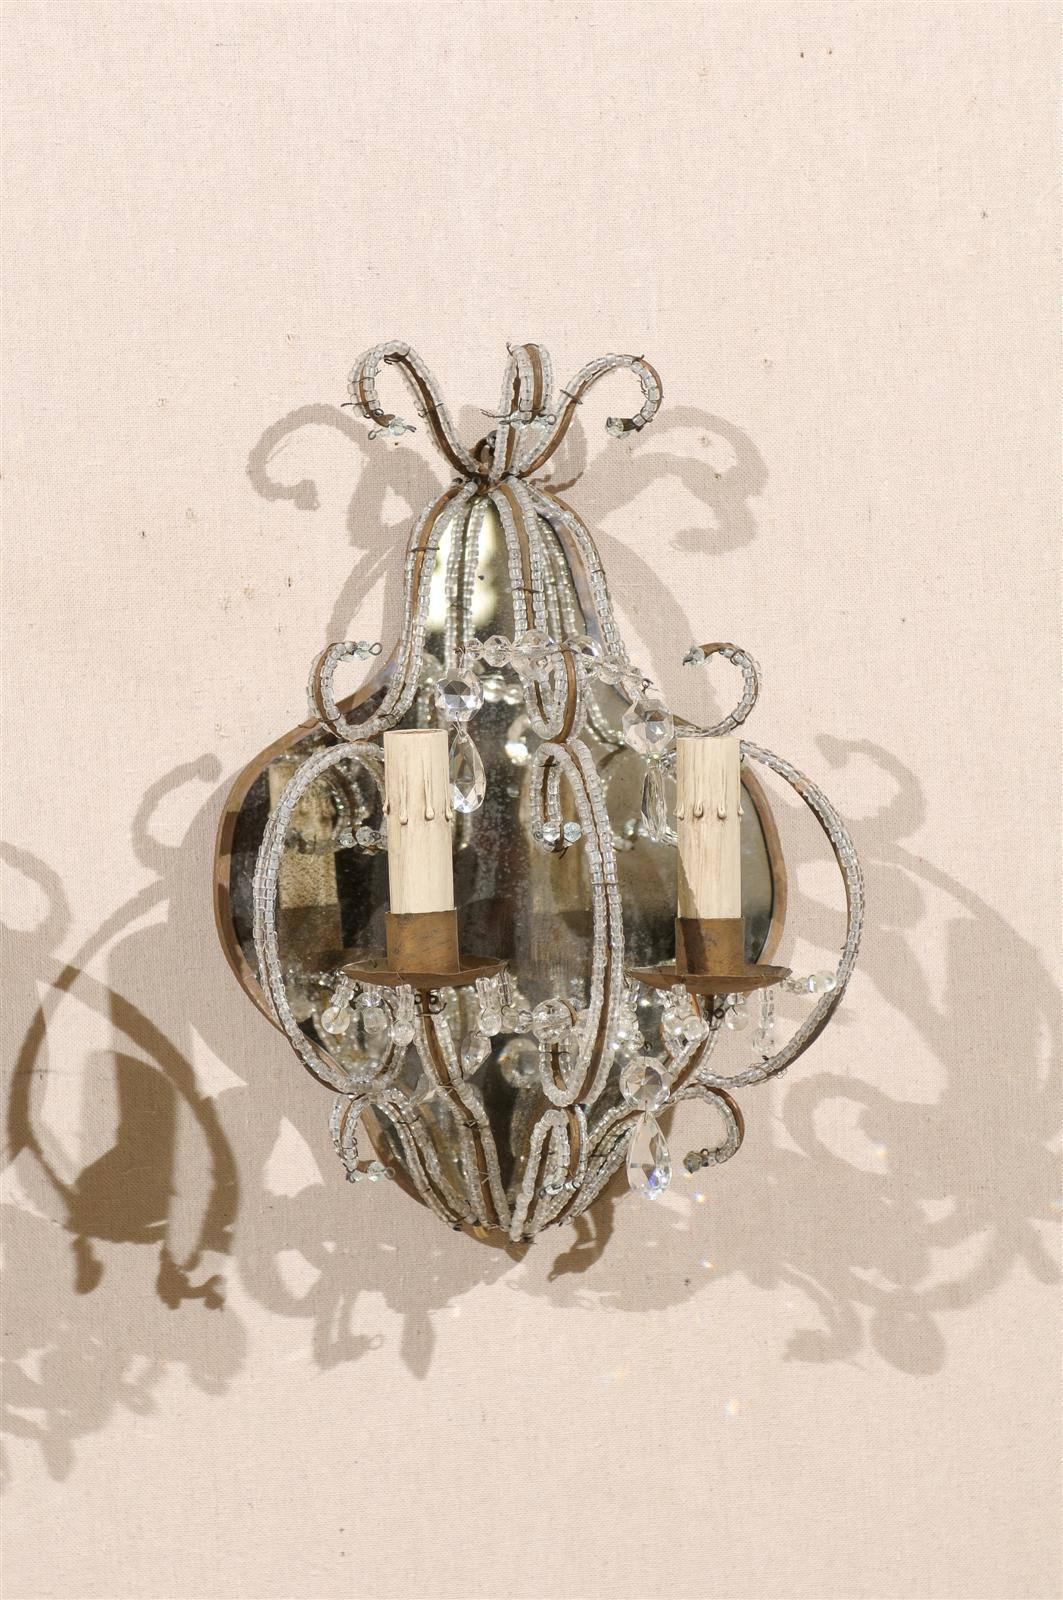 Metal Pair of Italian Mirrored Sconces with Elegant Beaded Armature and Scrolls